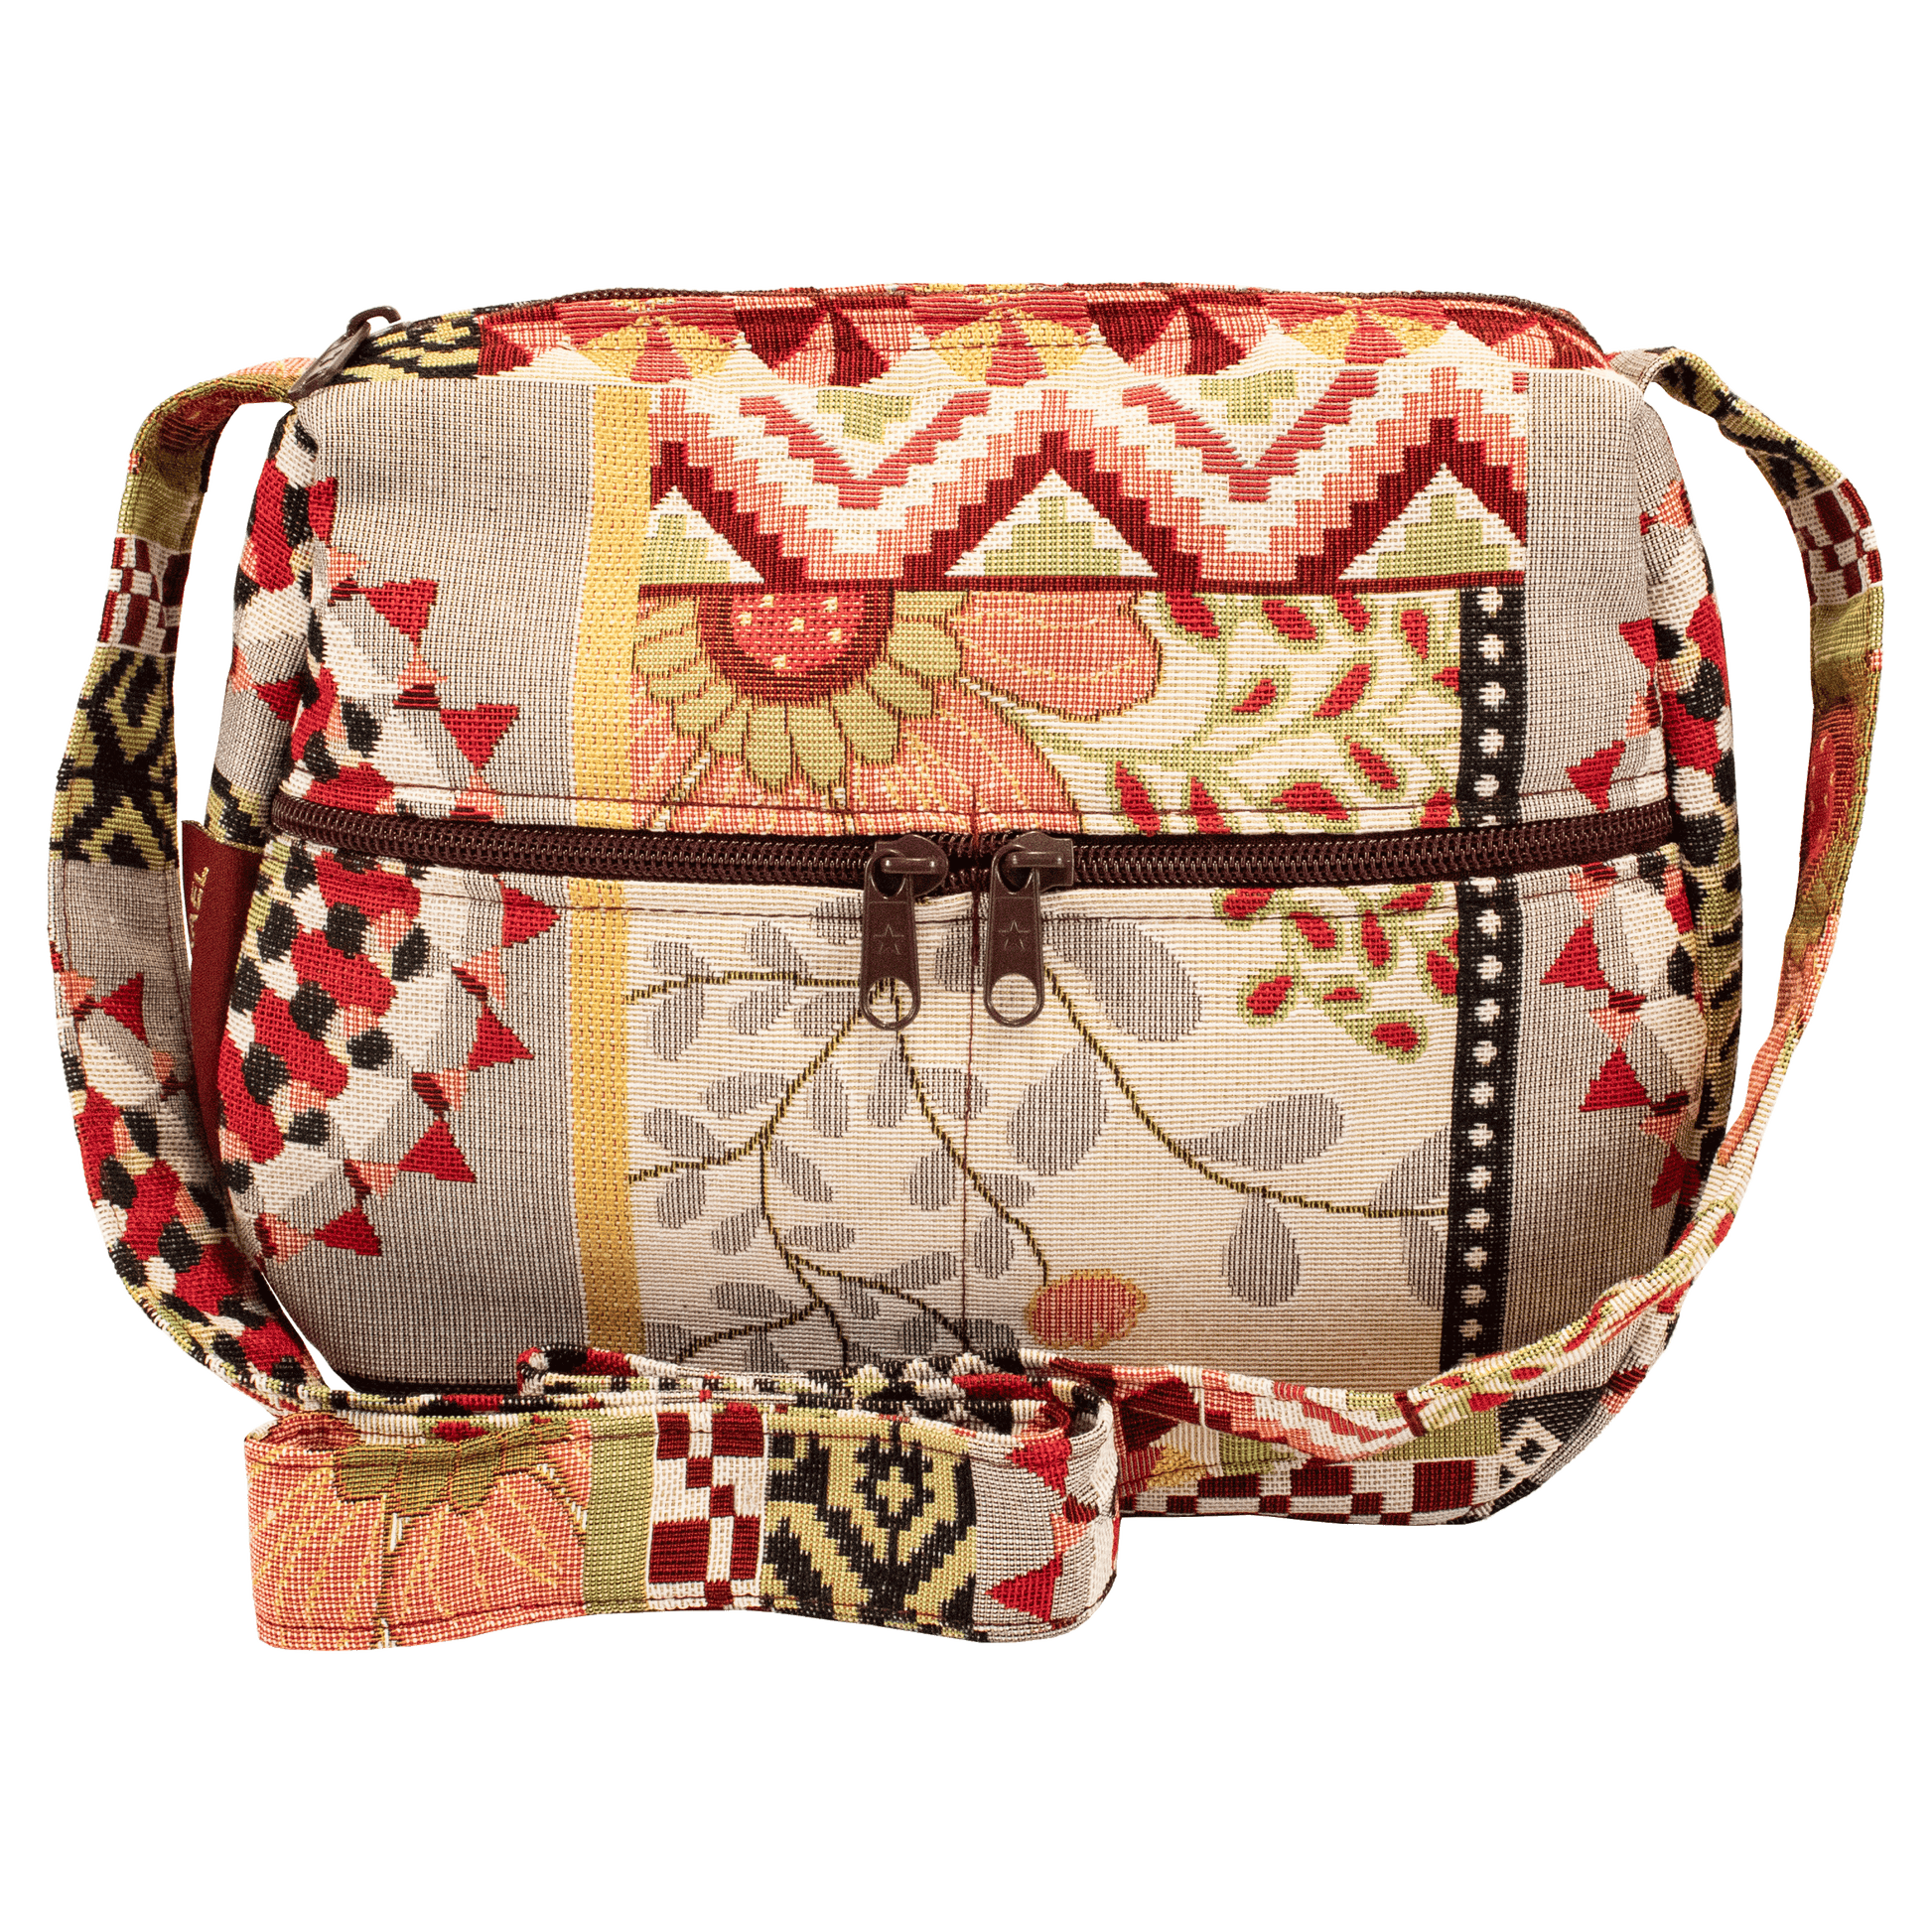 Medium sized shoulder or crossbody bag with various floral pattern 